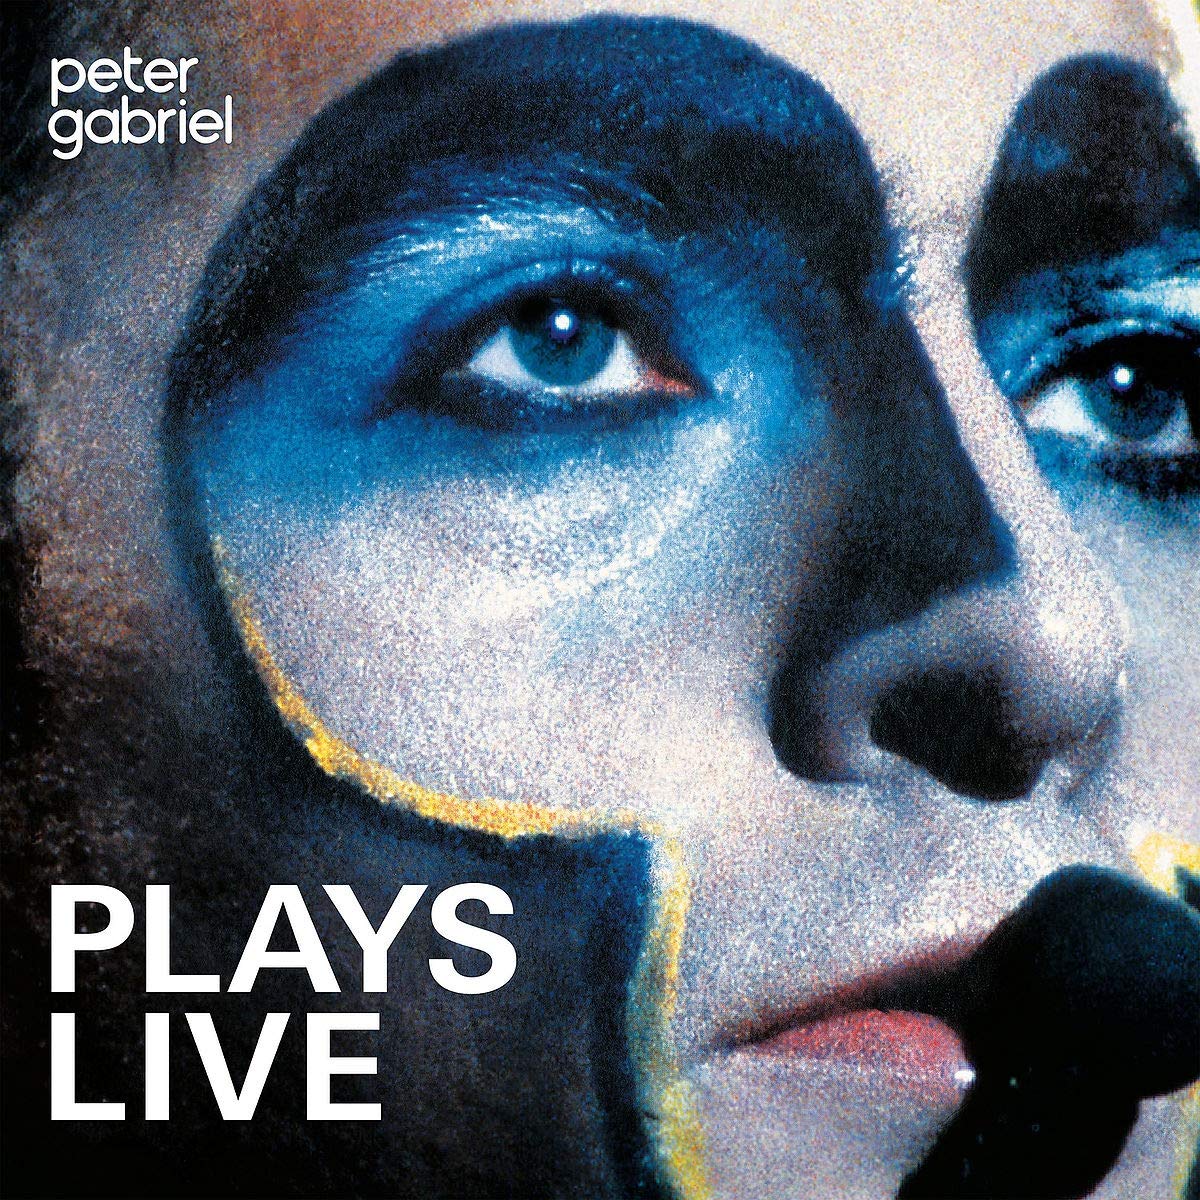 40 years ago today, PETER GABRIEL released his first live-album, 'Plays Live'.
Our review: bit.ly/3NmzxM8 
@itspetergabriel @mozoishere @ProgMagazineUK #petergabriel @JerryMarotta